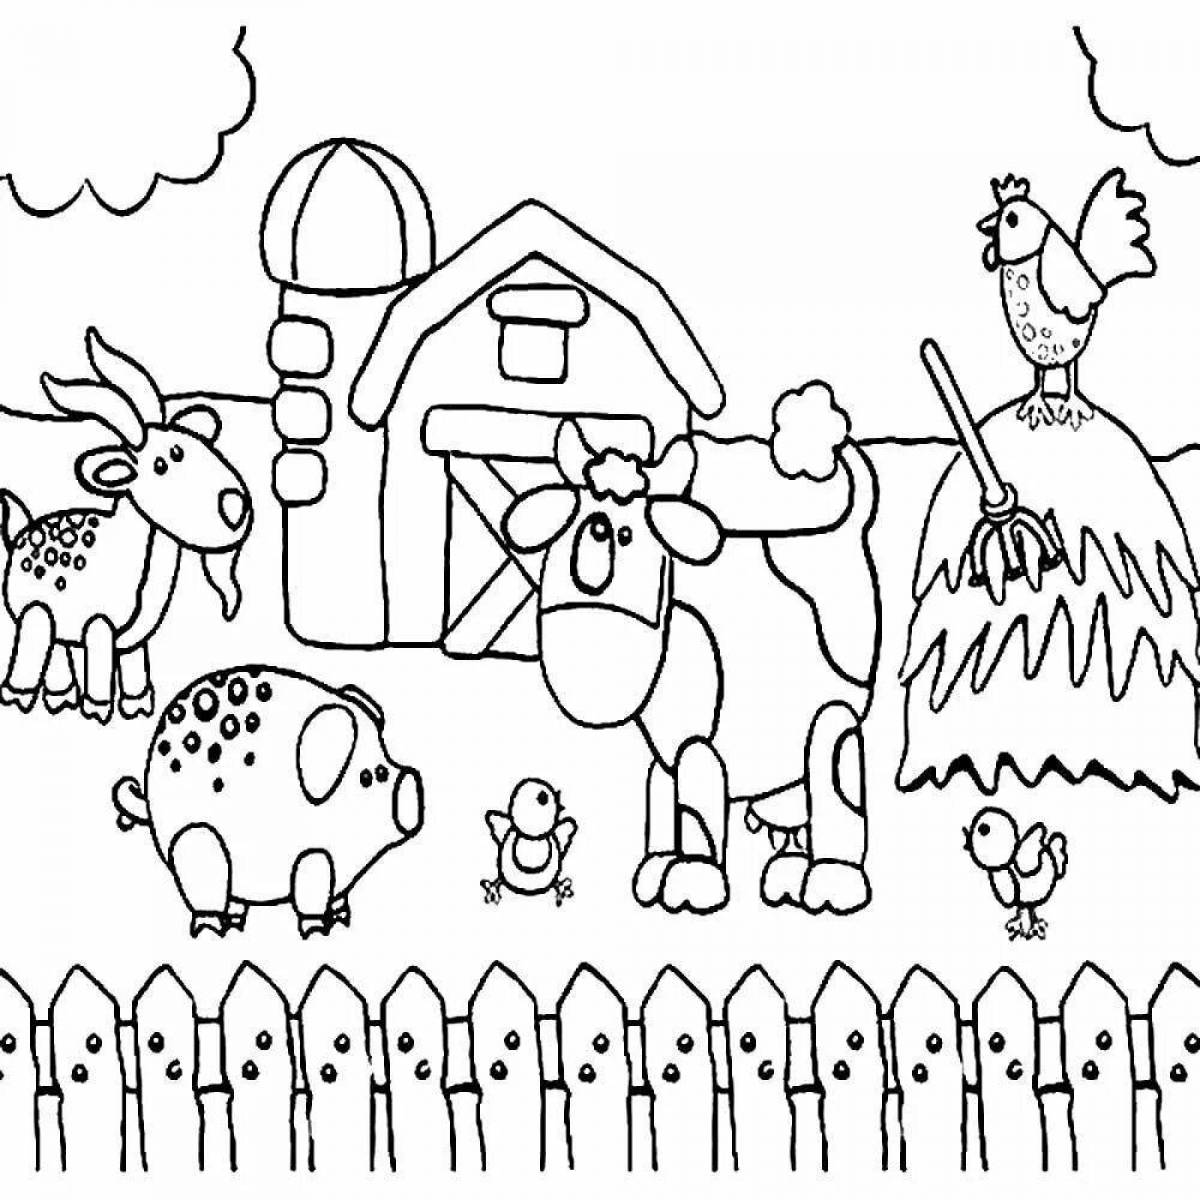 Adorable winter animal hut coloring page